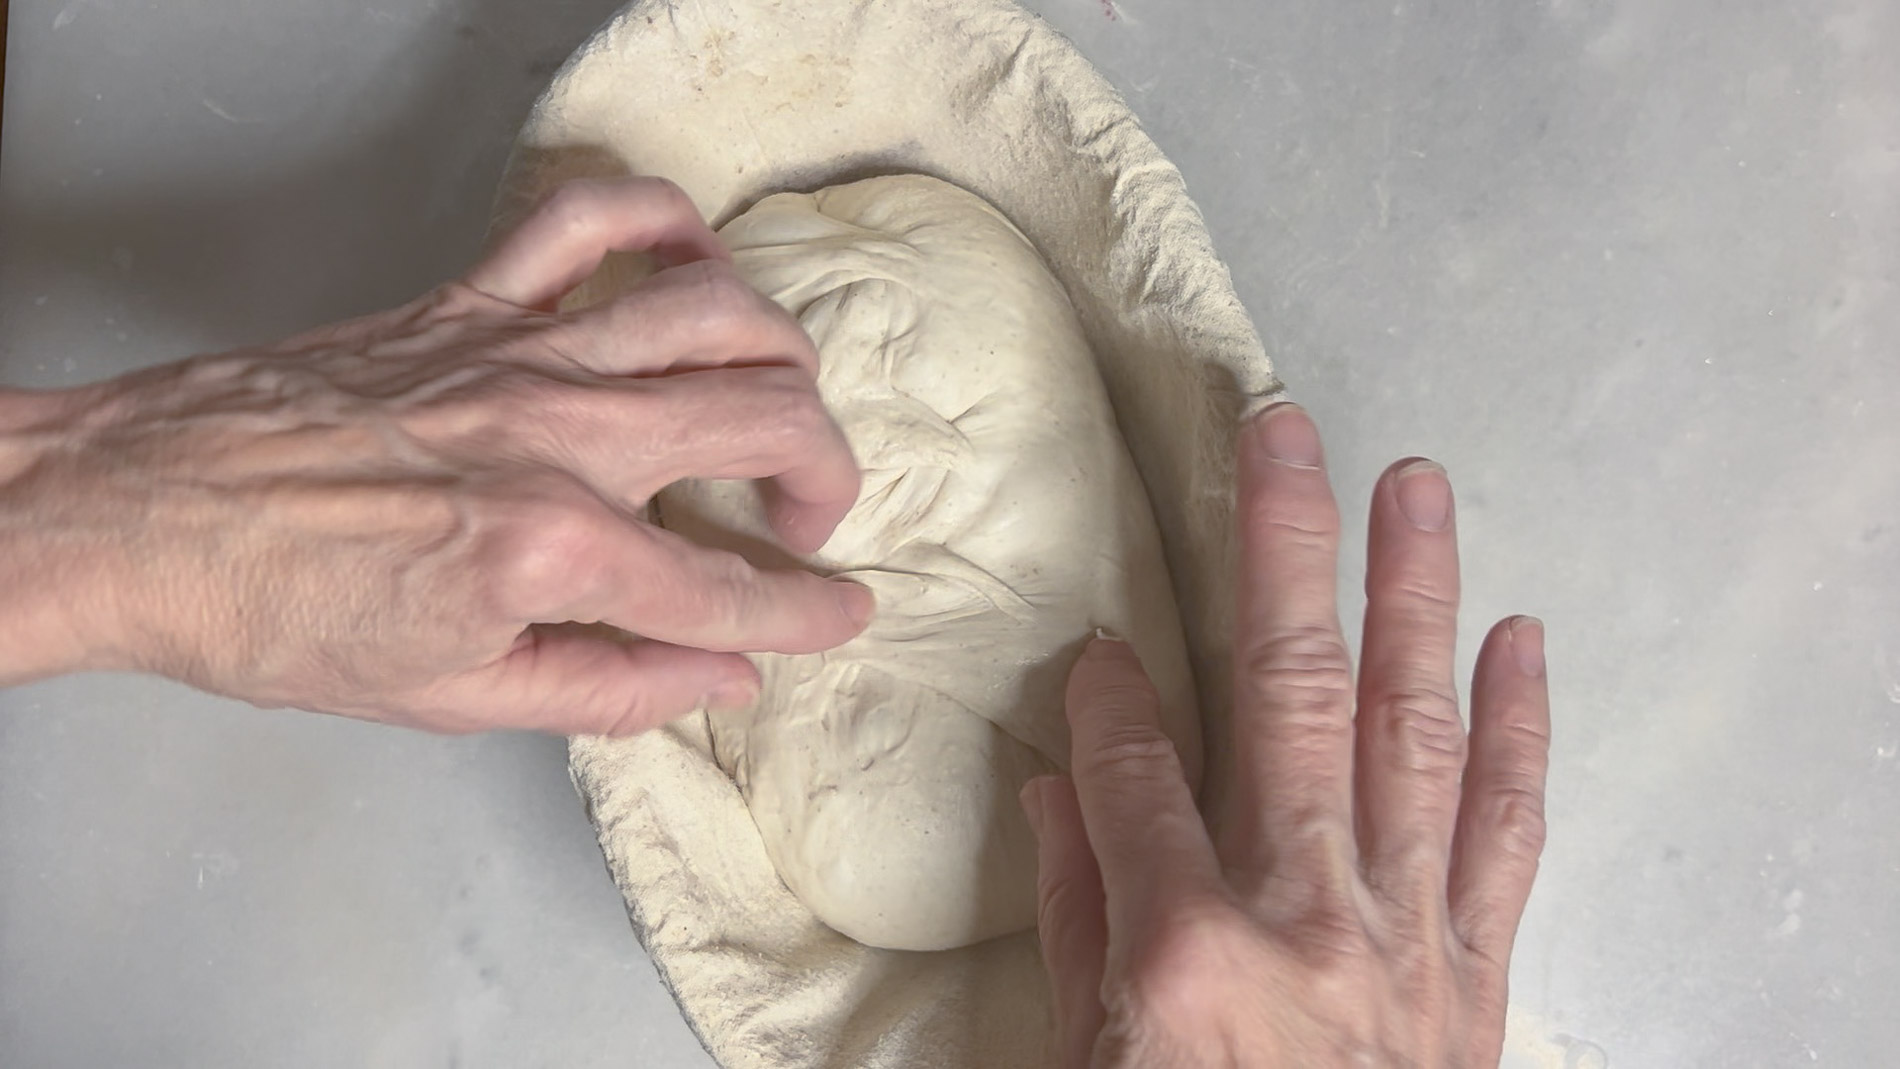 Stitching the dough with fingers to create tension